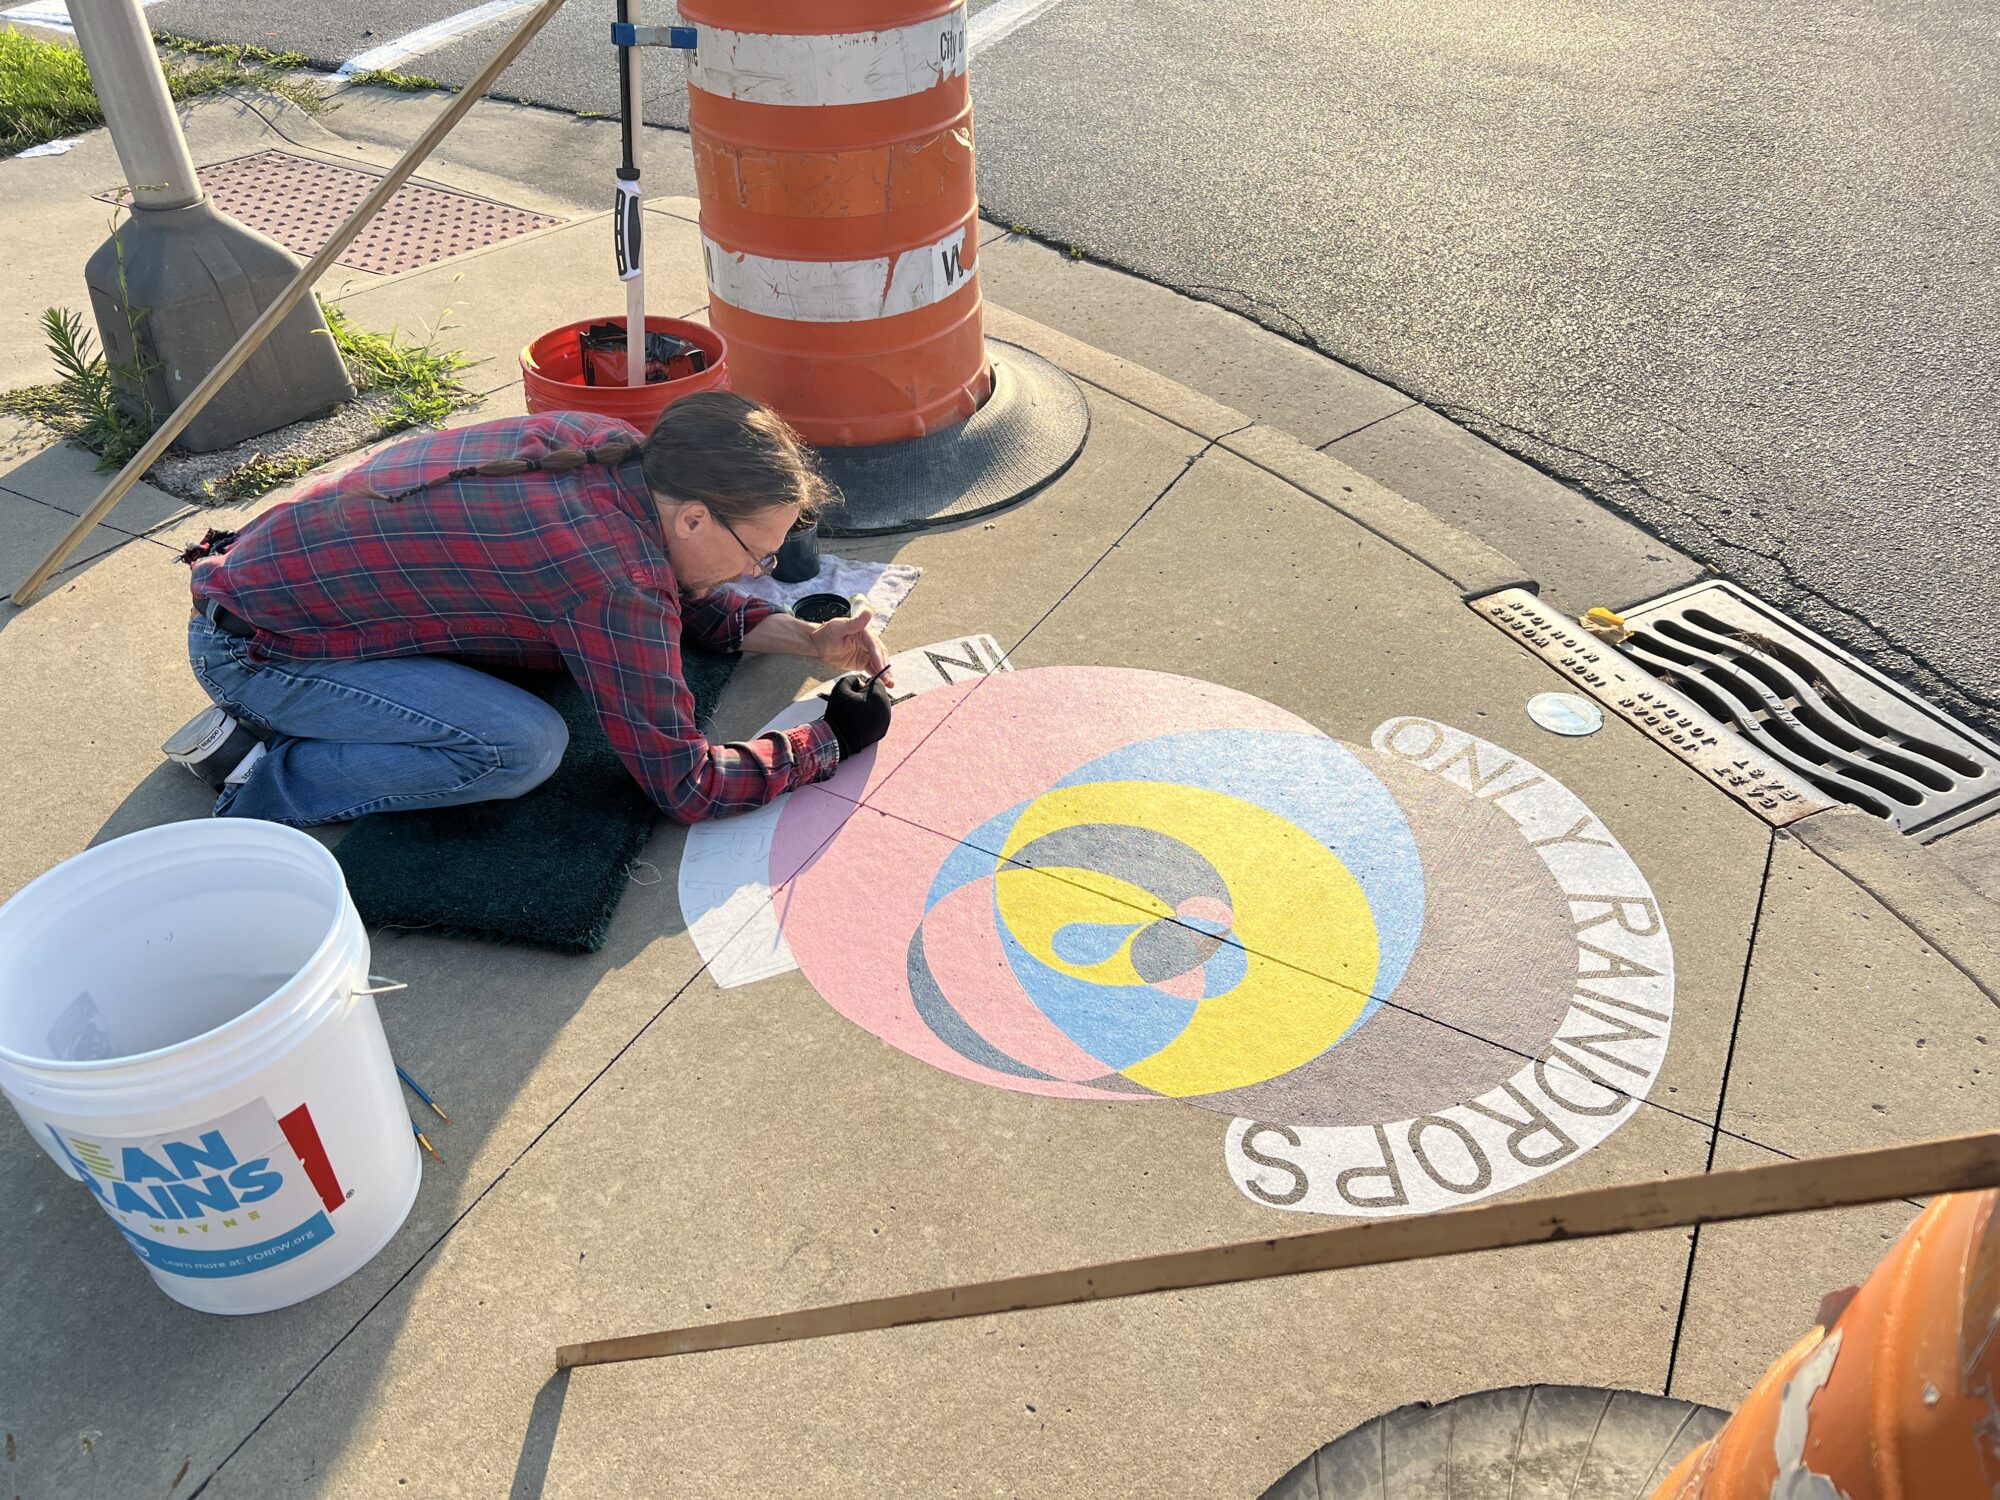 Picture of artist painting a Clean Drains mural that says "Only Raindrops in the Drain".